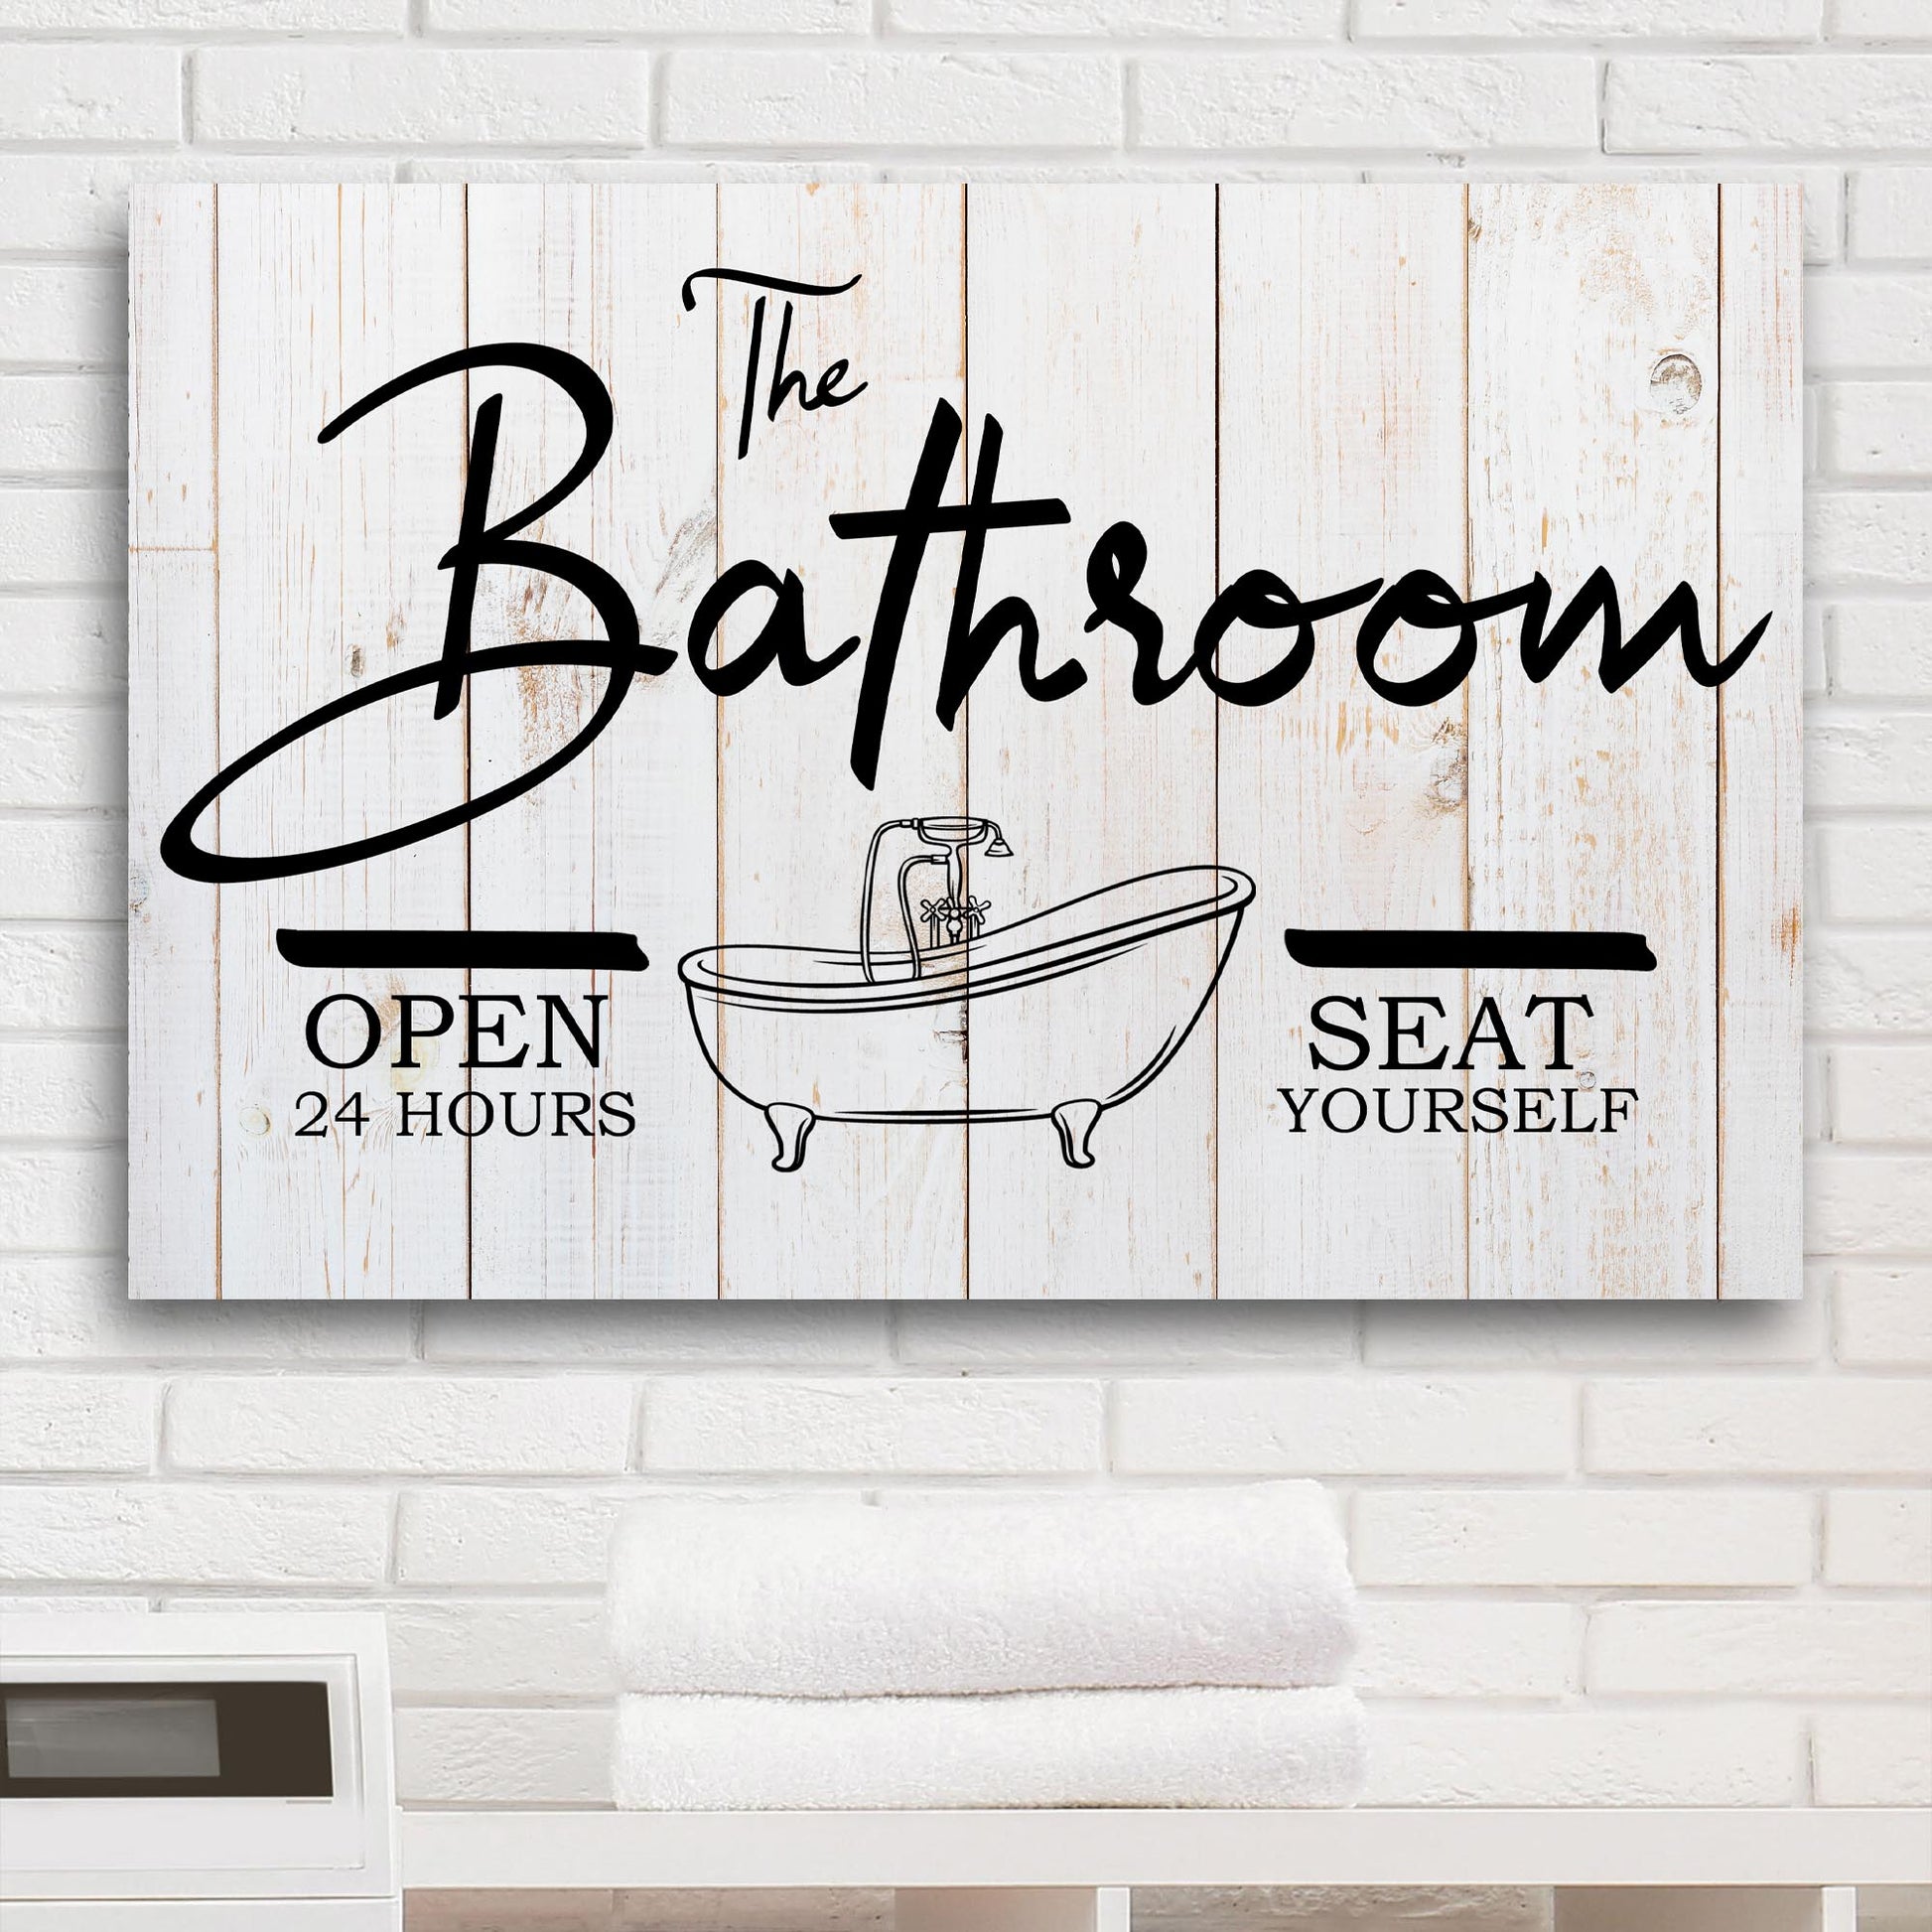 The Bathroom Sign - Image by Tailored Canvases